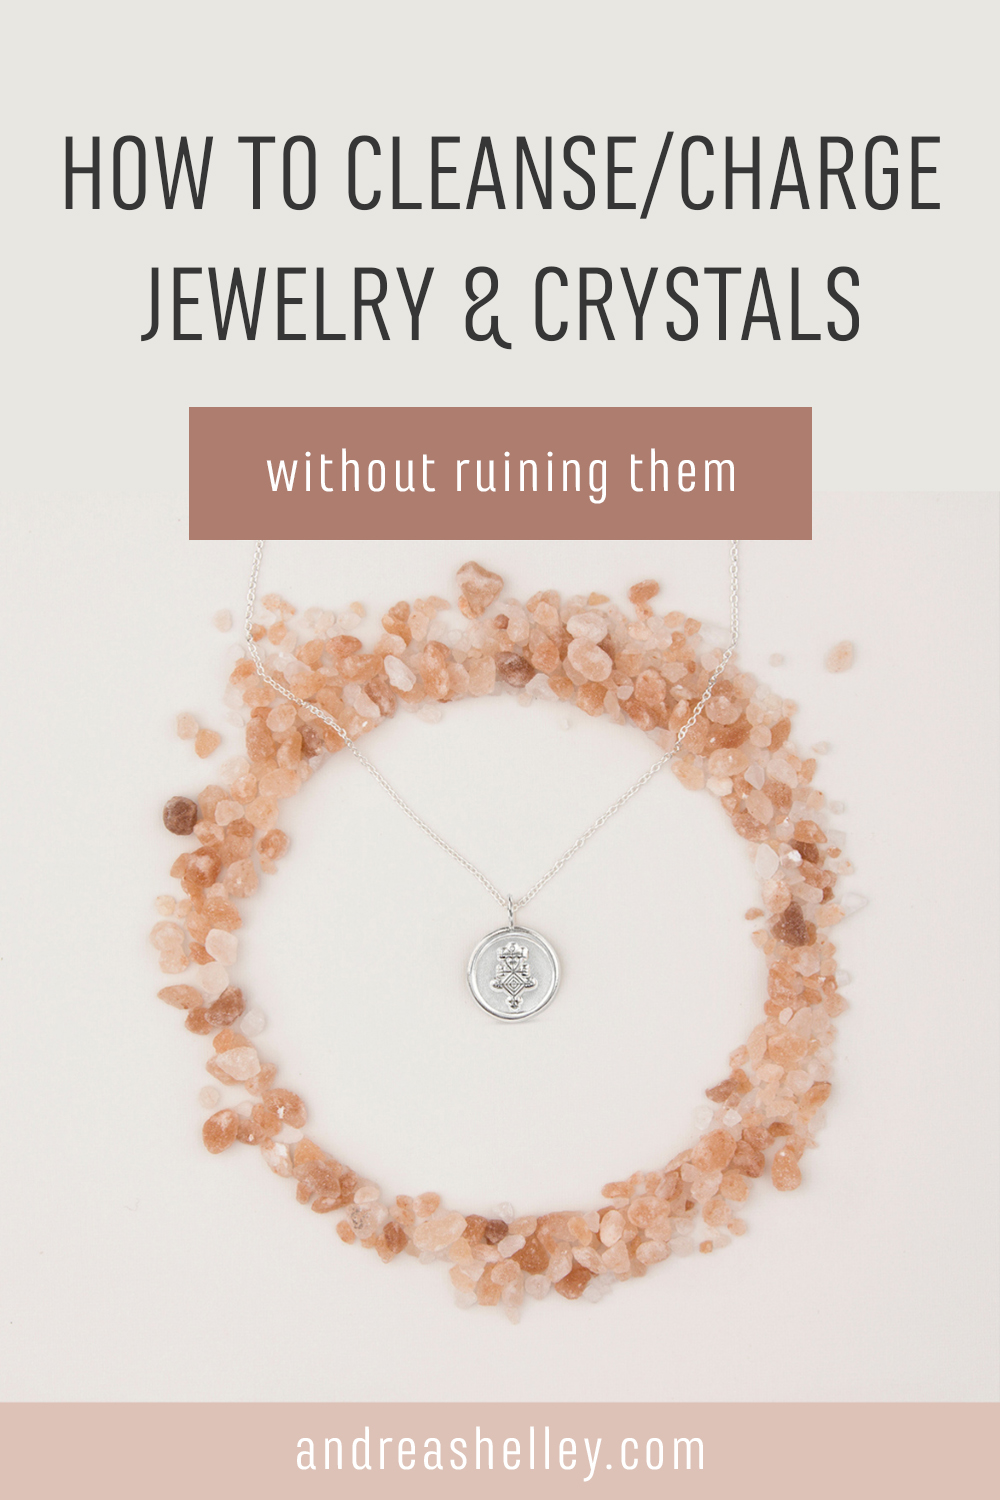 How to Cleanse and Charge Jewelry or Crystals without ruining them